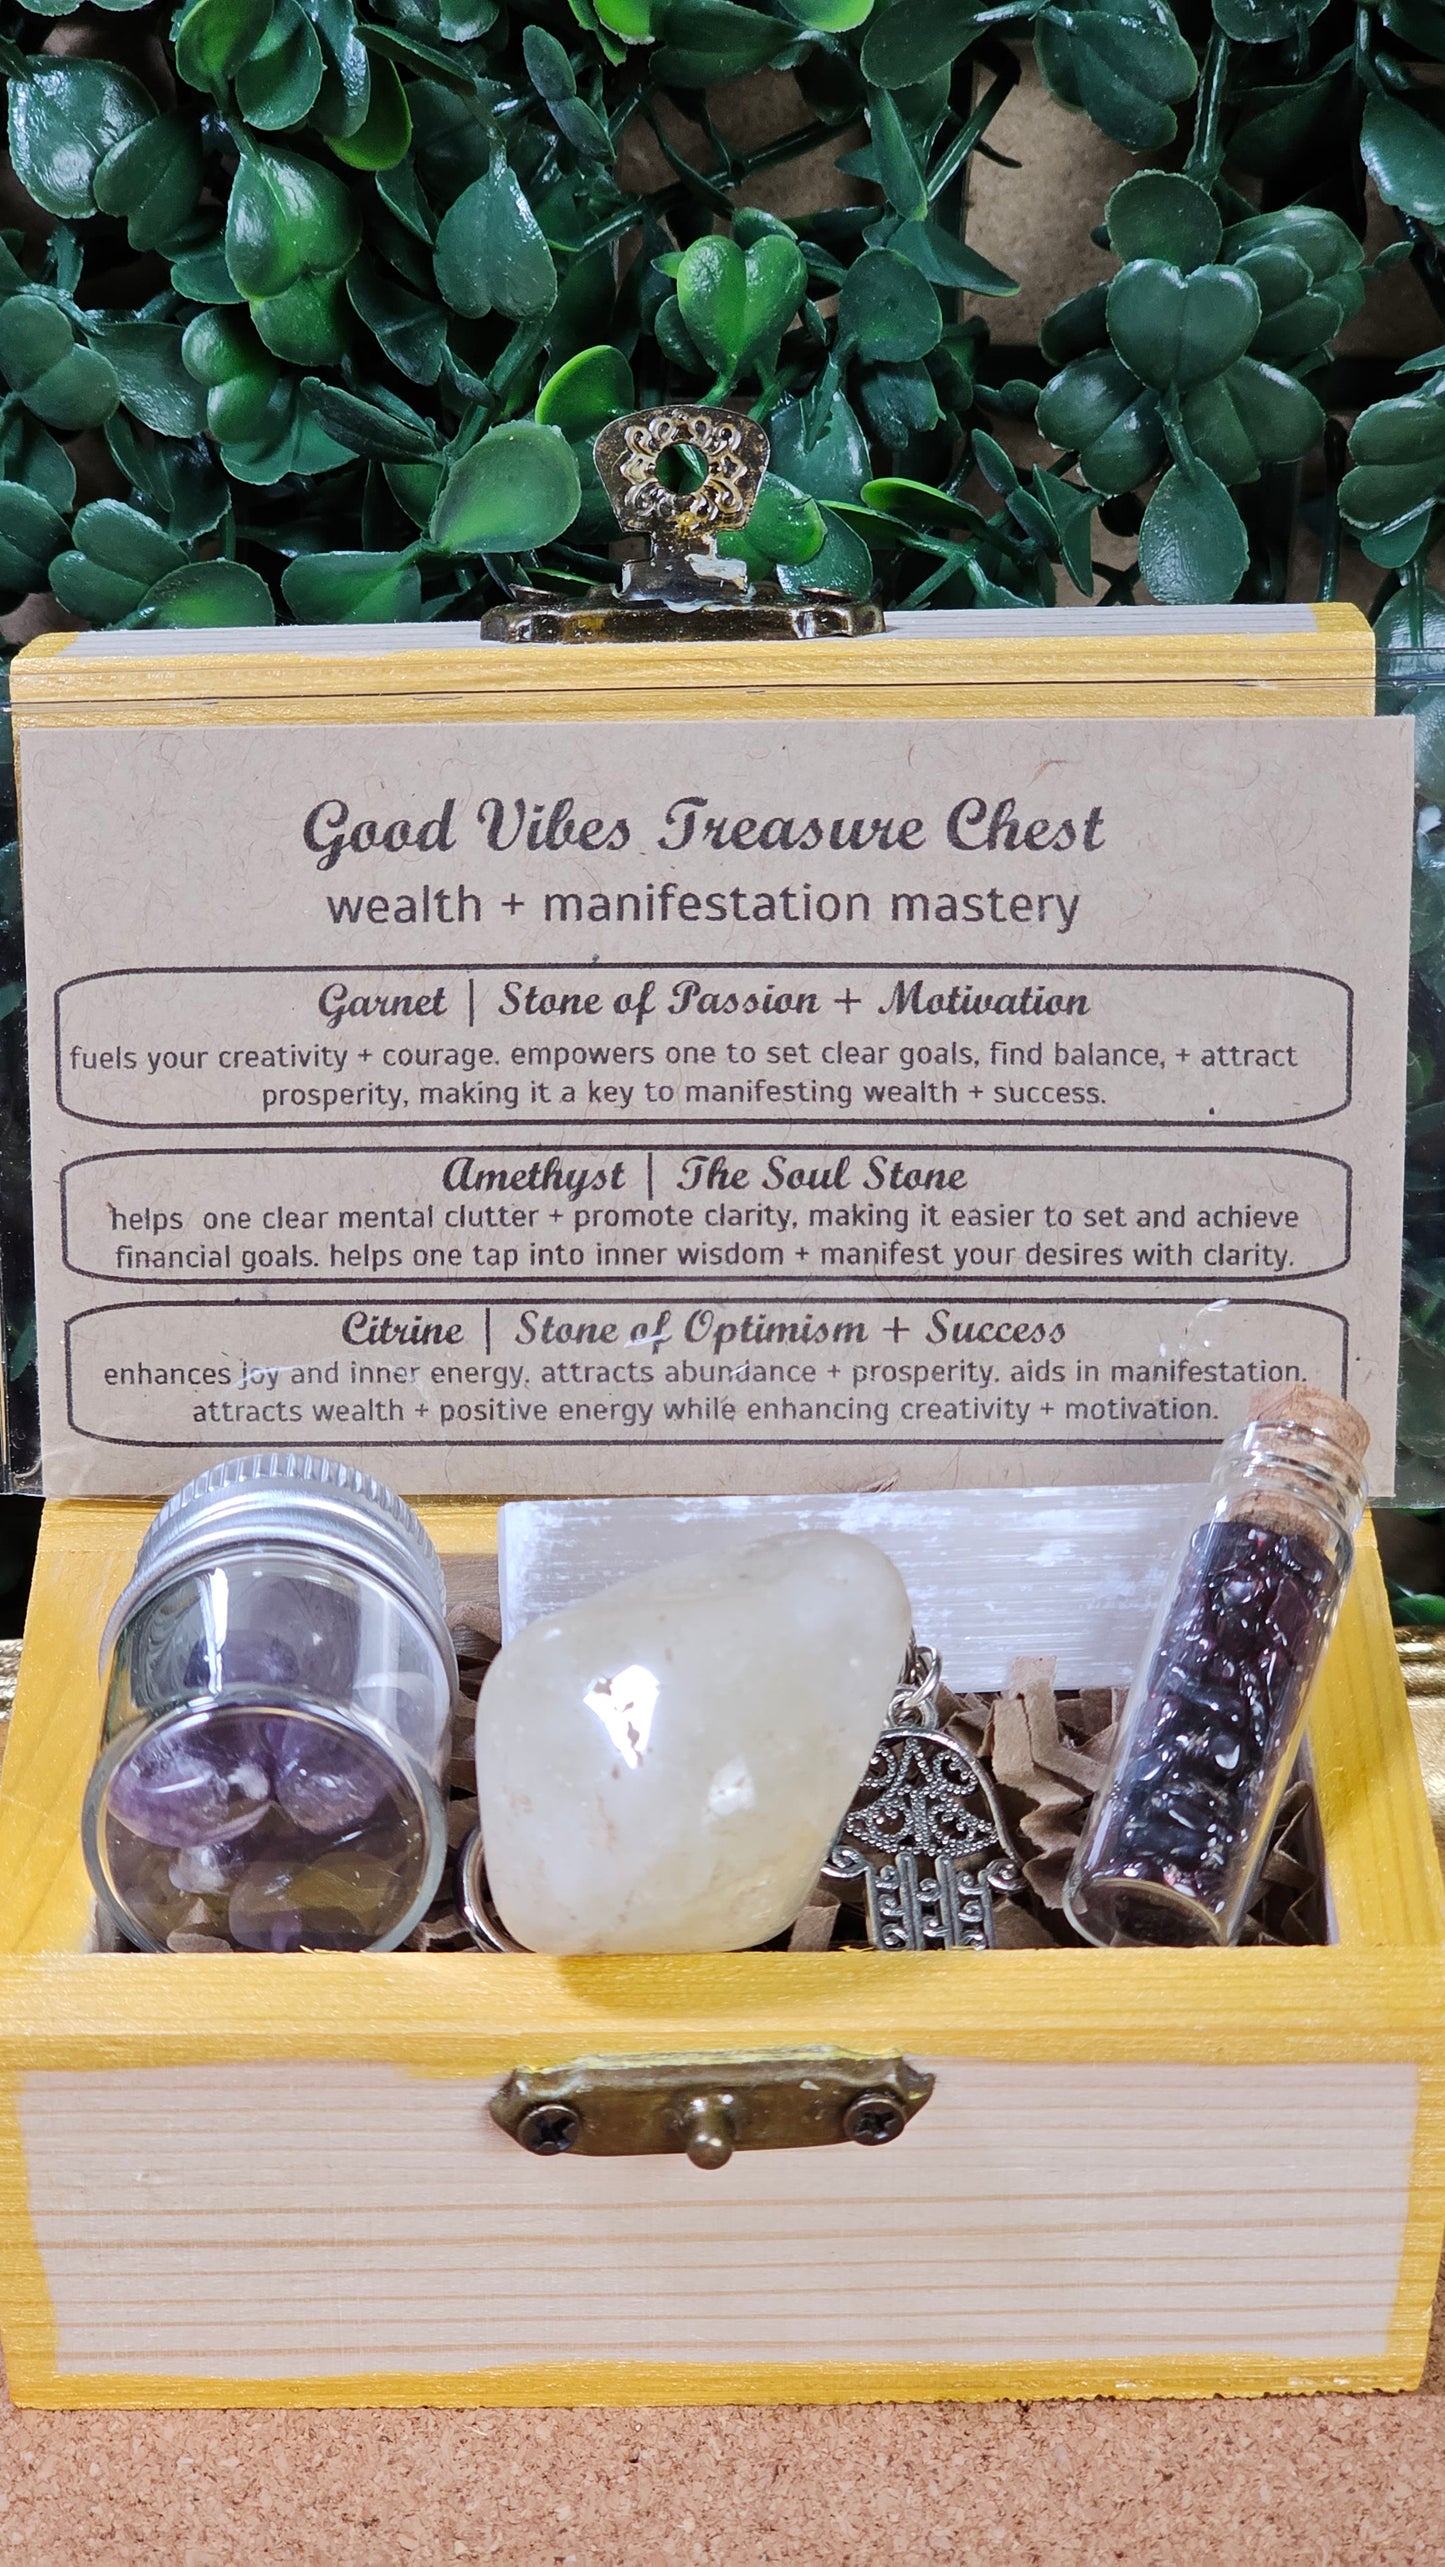 Wealth and Manifestation Mastery - Treasure Chest